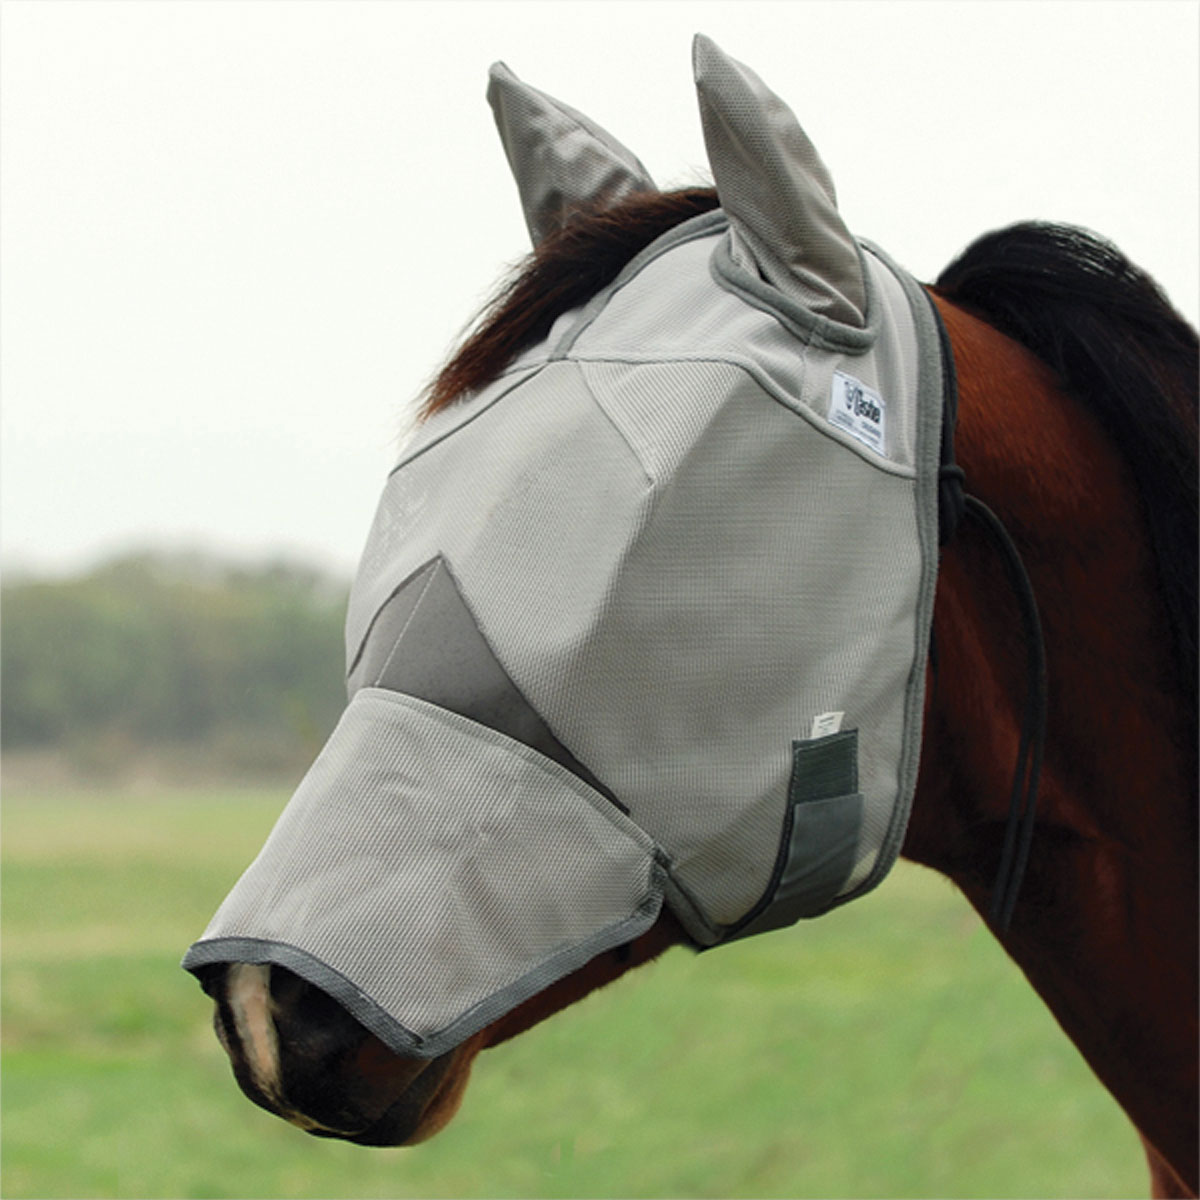 Horse Fly Mask Face Mask with Mesh Eyes Ears Extra Comfort Lycra Equine Avoid UV for Pony/Cob/Arab